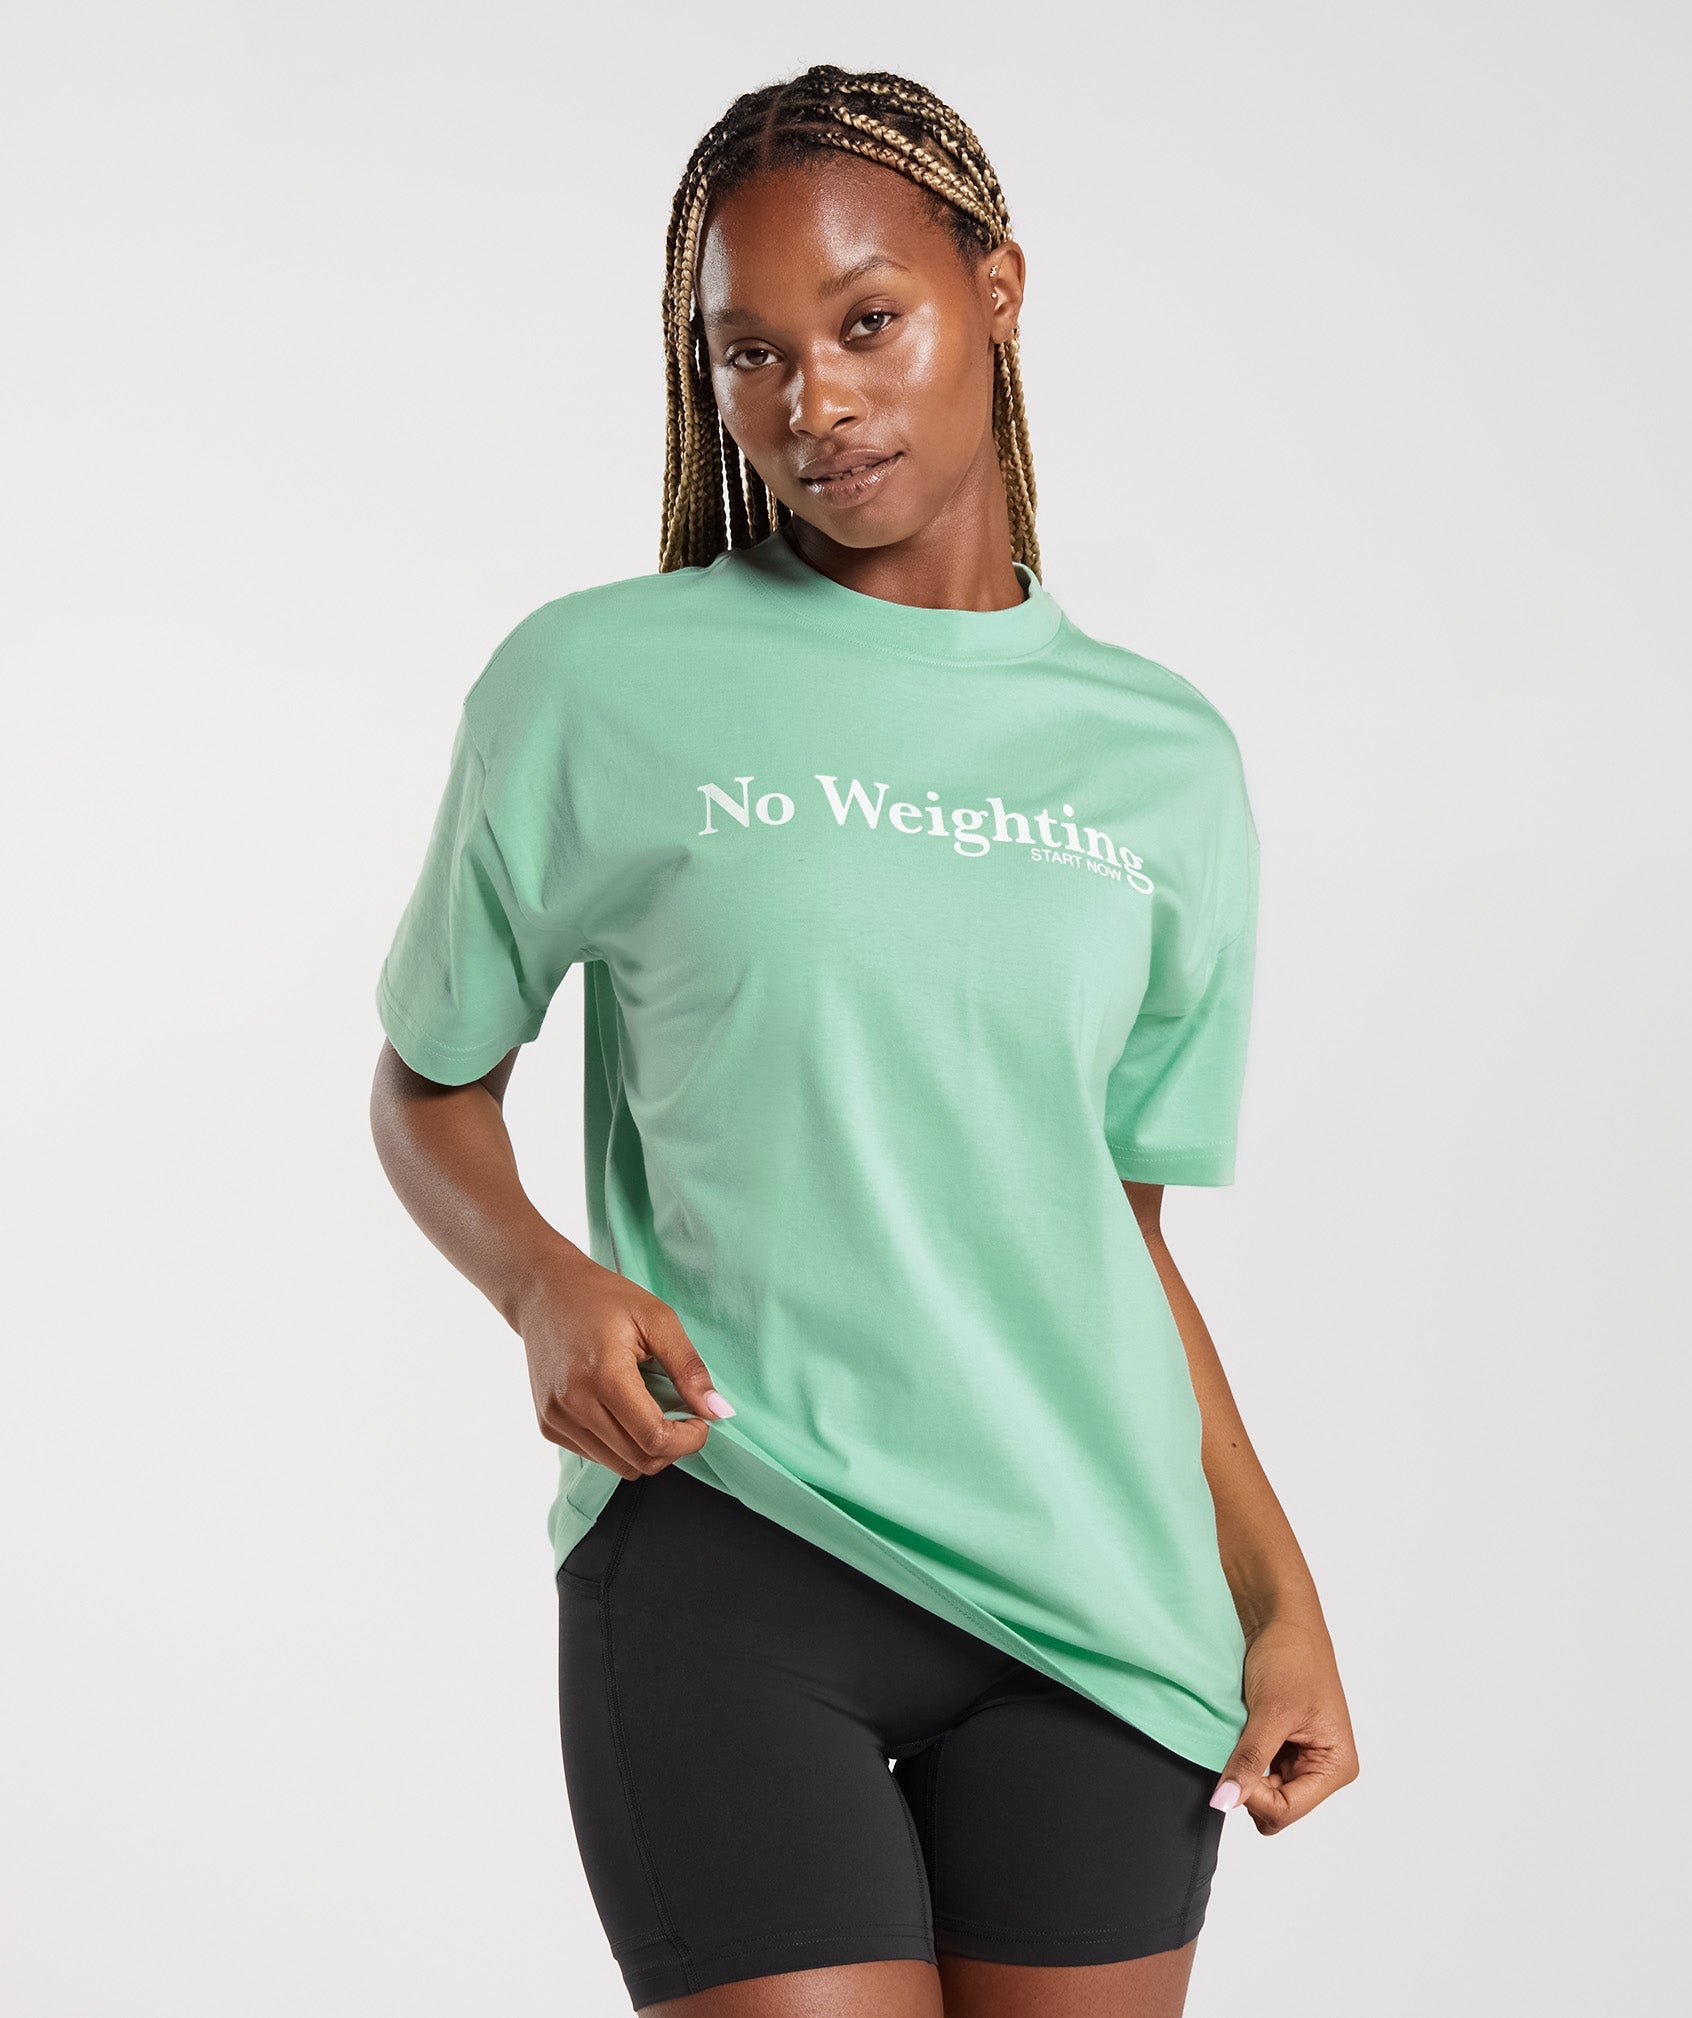 No Weighting Oversized T-Shirt in Pastel Green - view 1